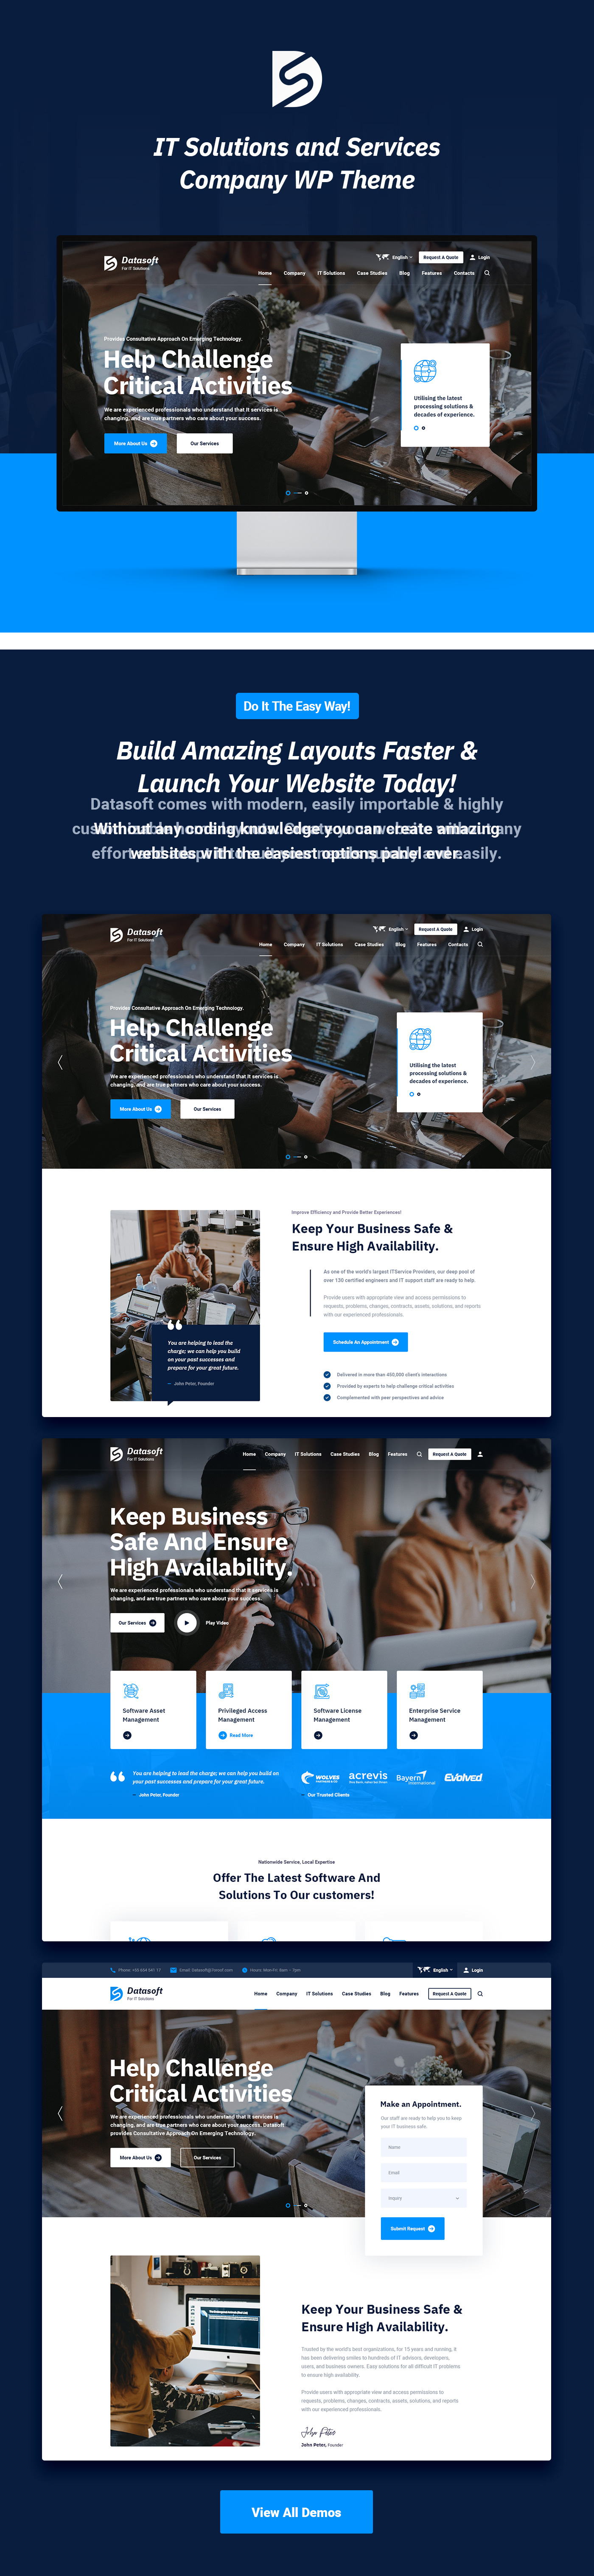 Datasoft - IT Solutions & Services HTML5 Template - 5